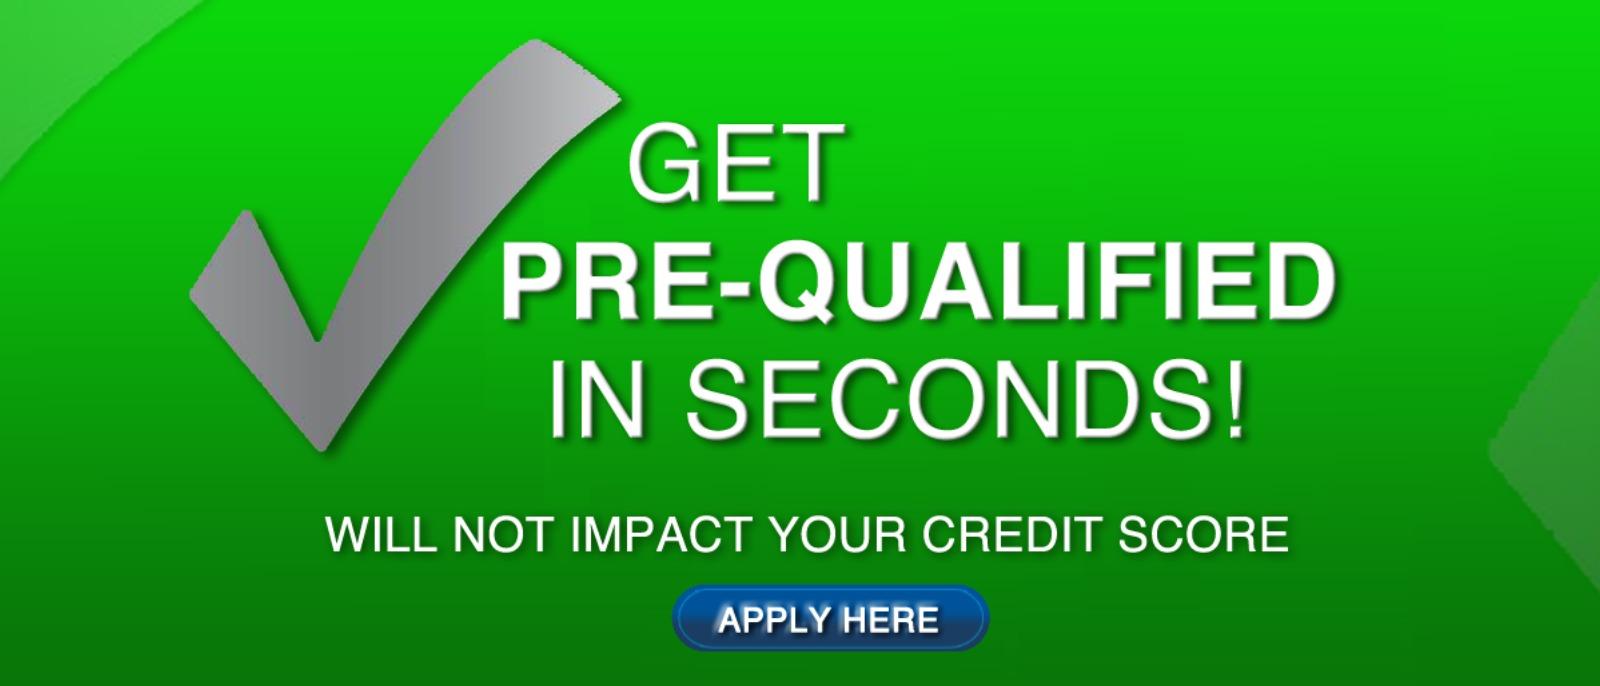 Get Pre-Qualified for Financing in Seconds with Len Lyall Chevrolet in Aurora, CO